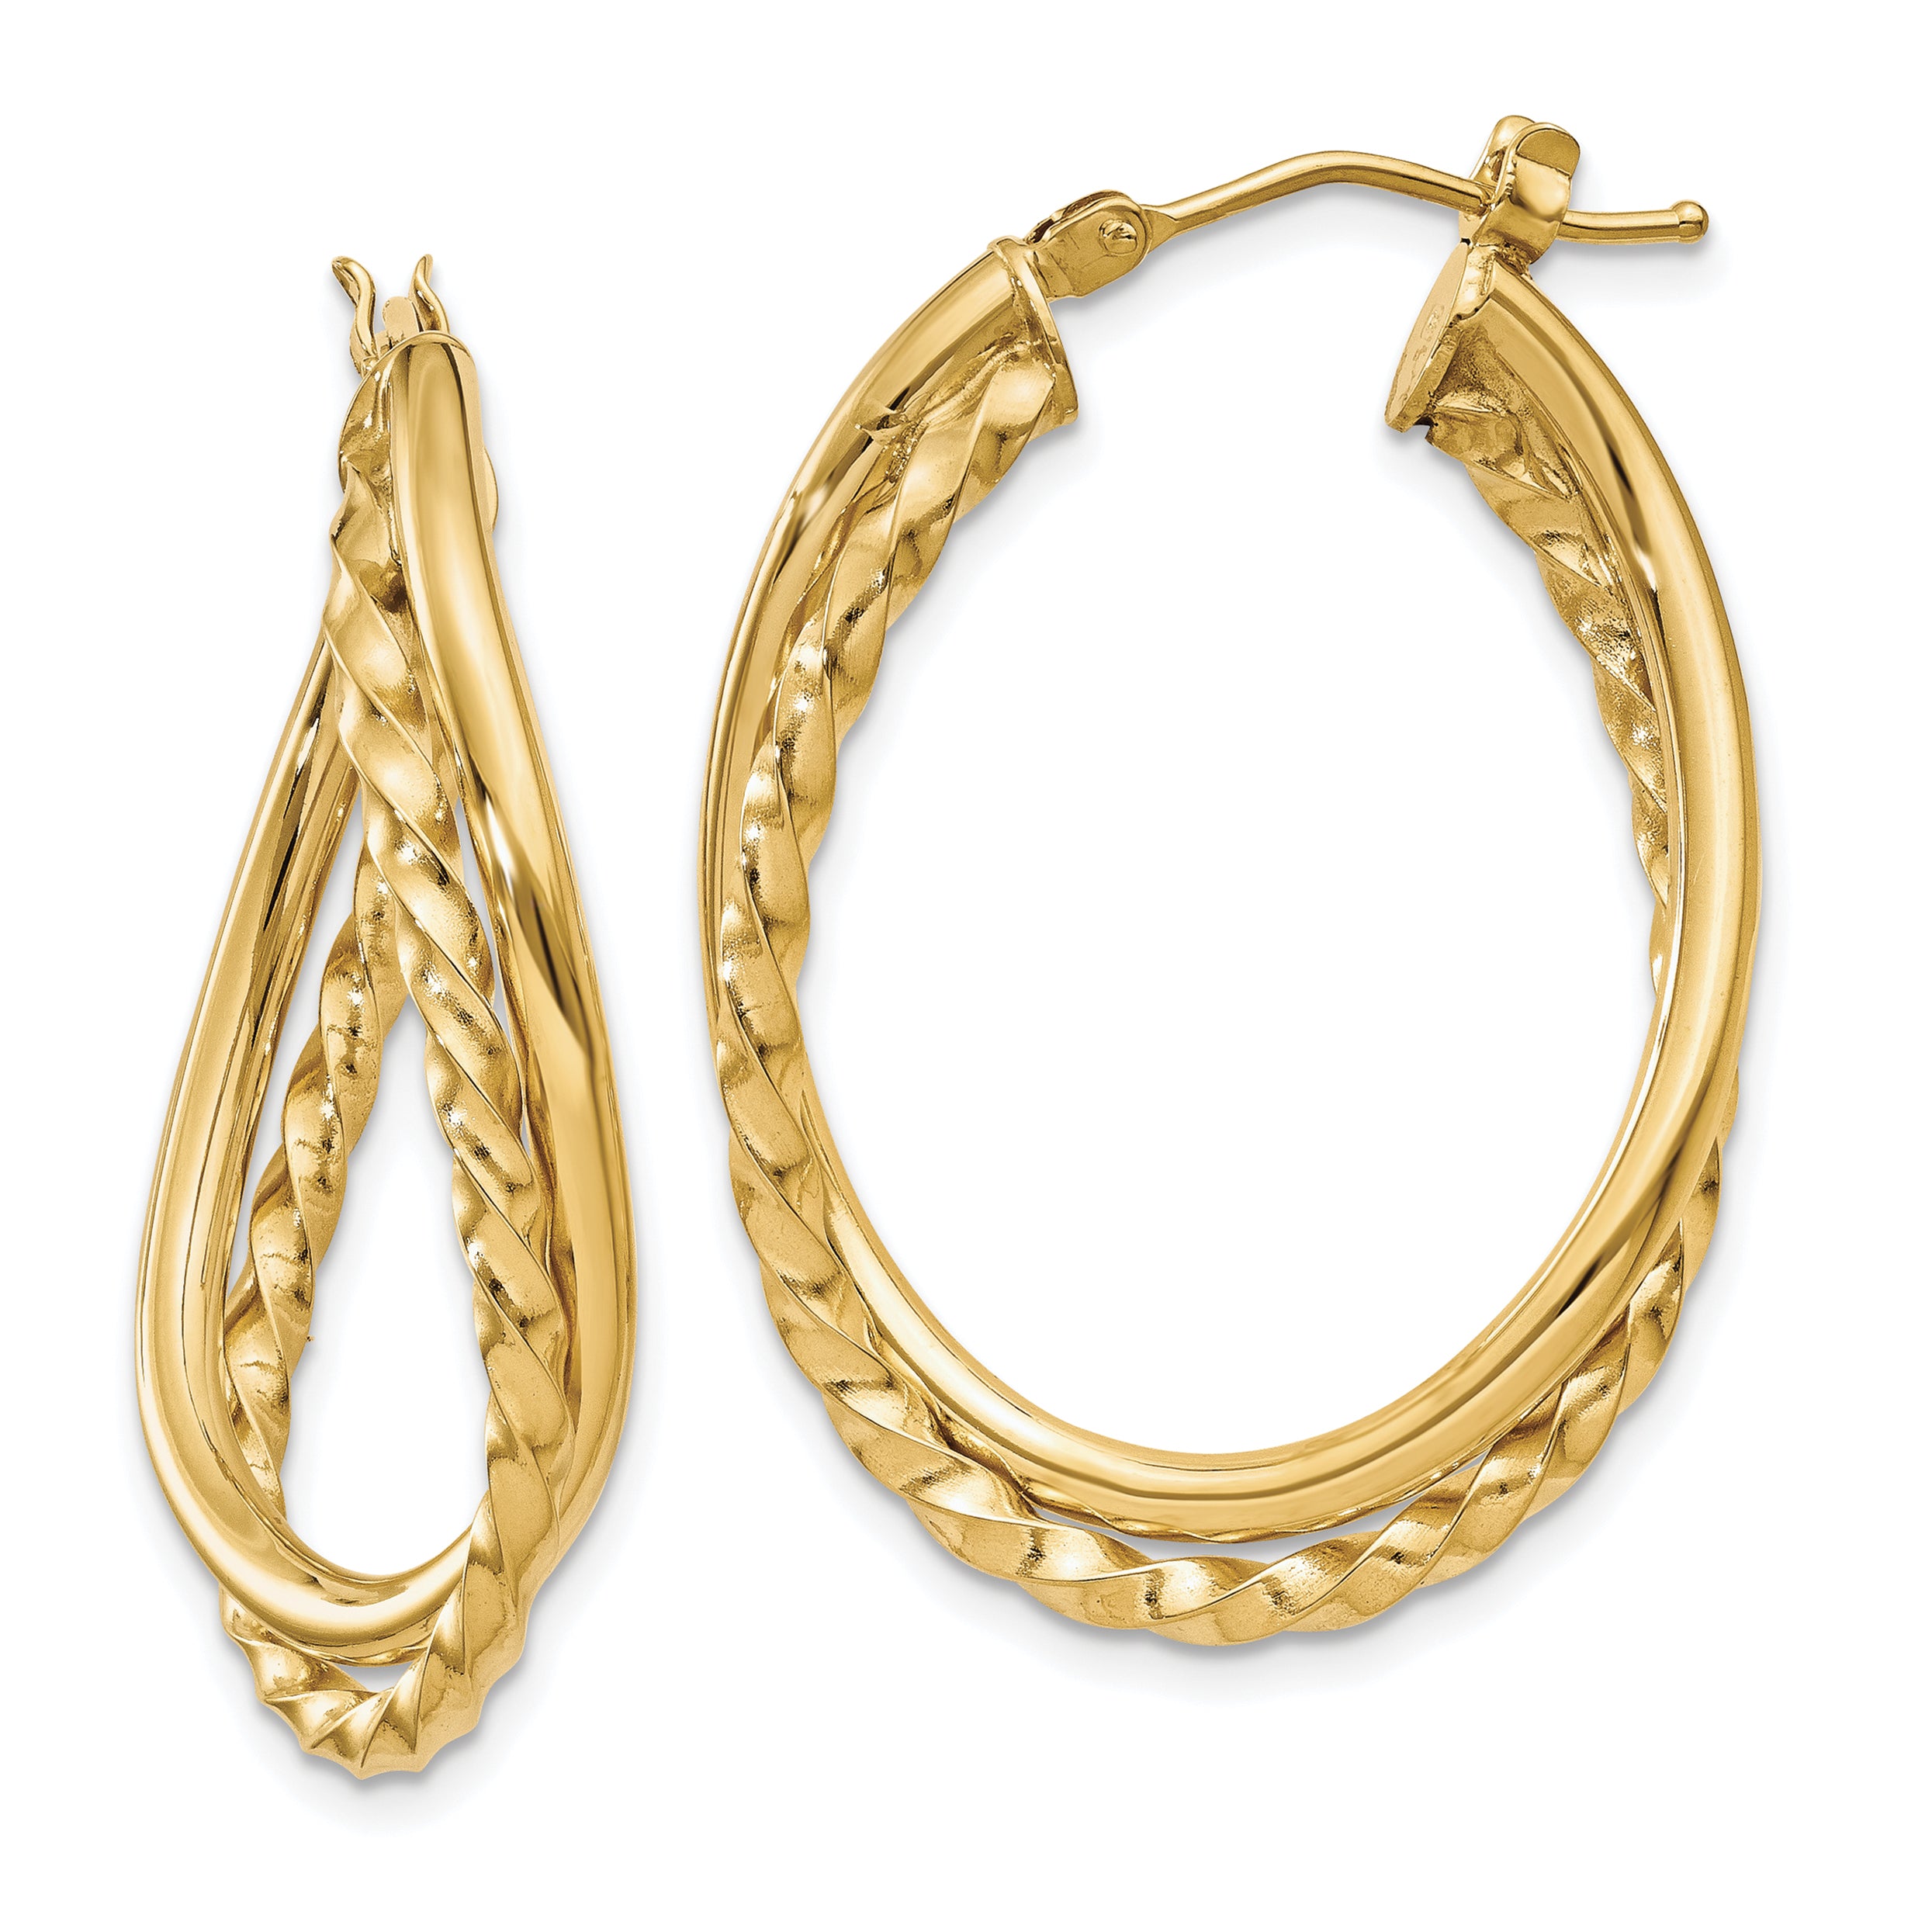 14k Textured and Polished Twist Oval Hoop Earrings